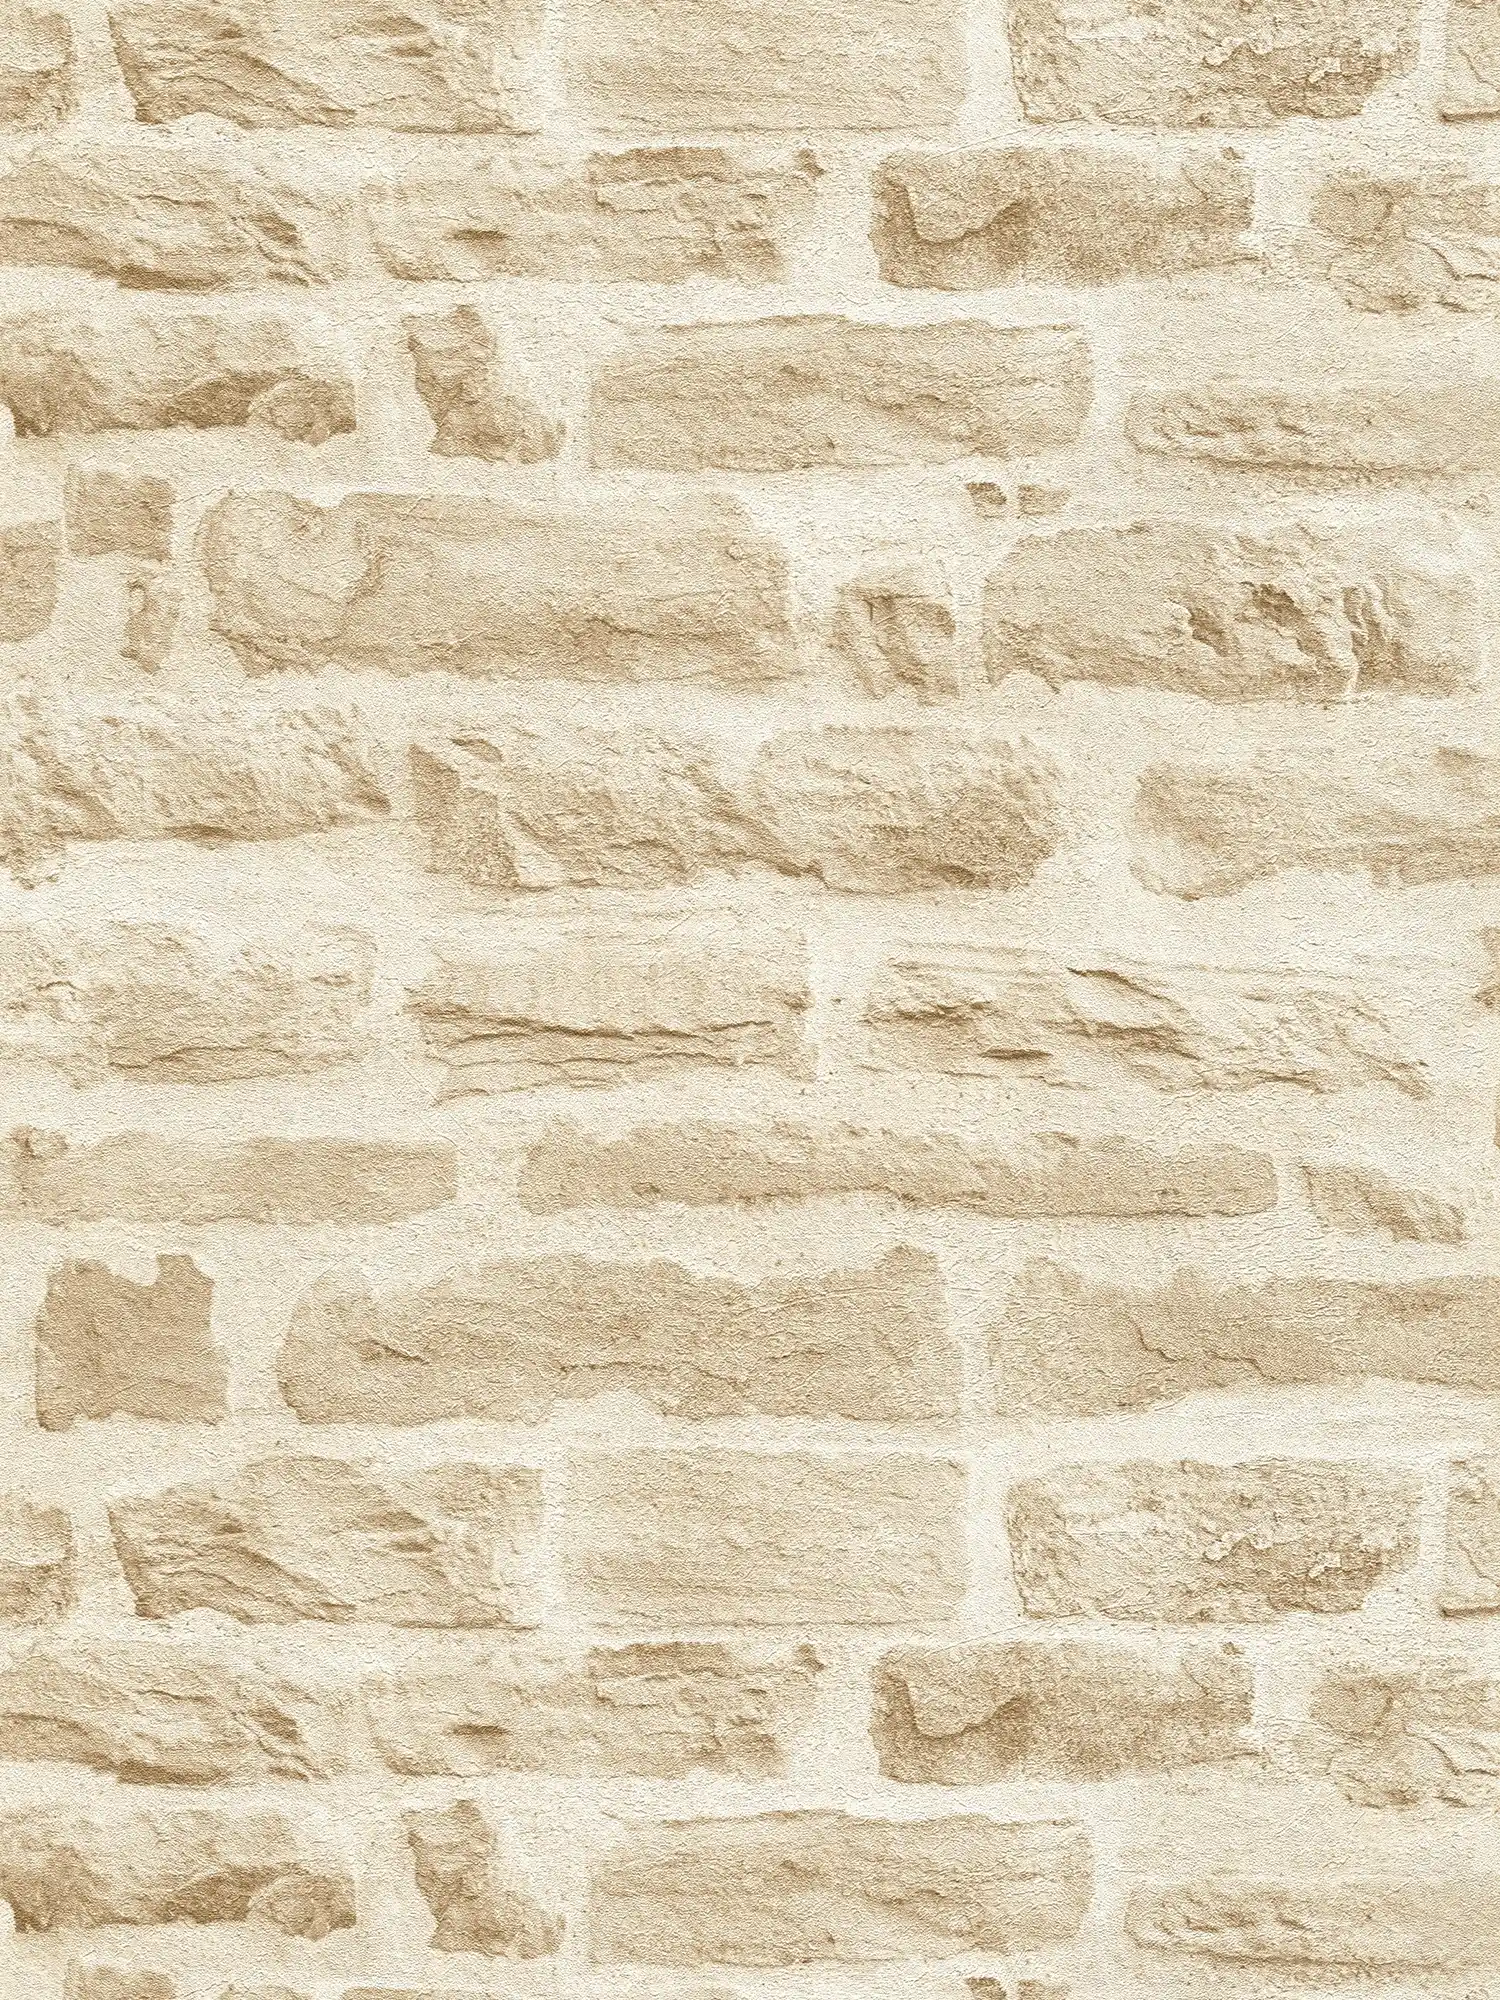         Non-woven wallpaper light beige with natural stone wall look - beige, cream
    